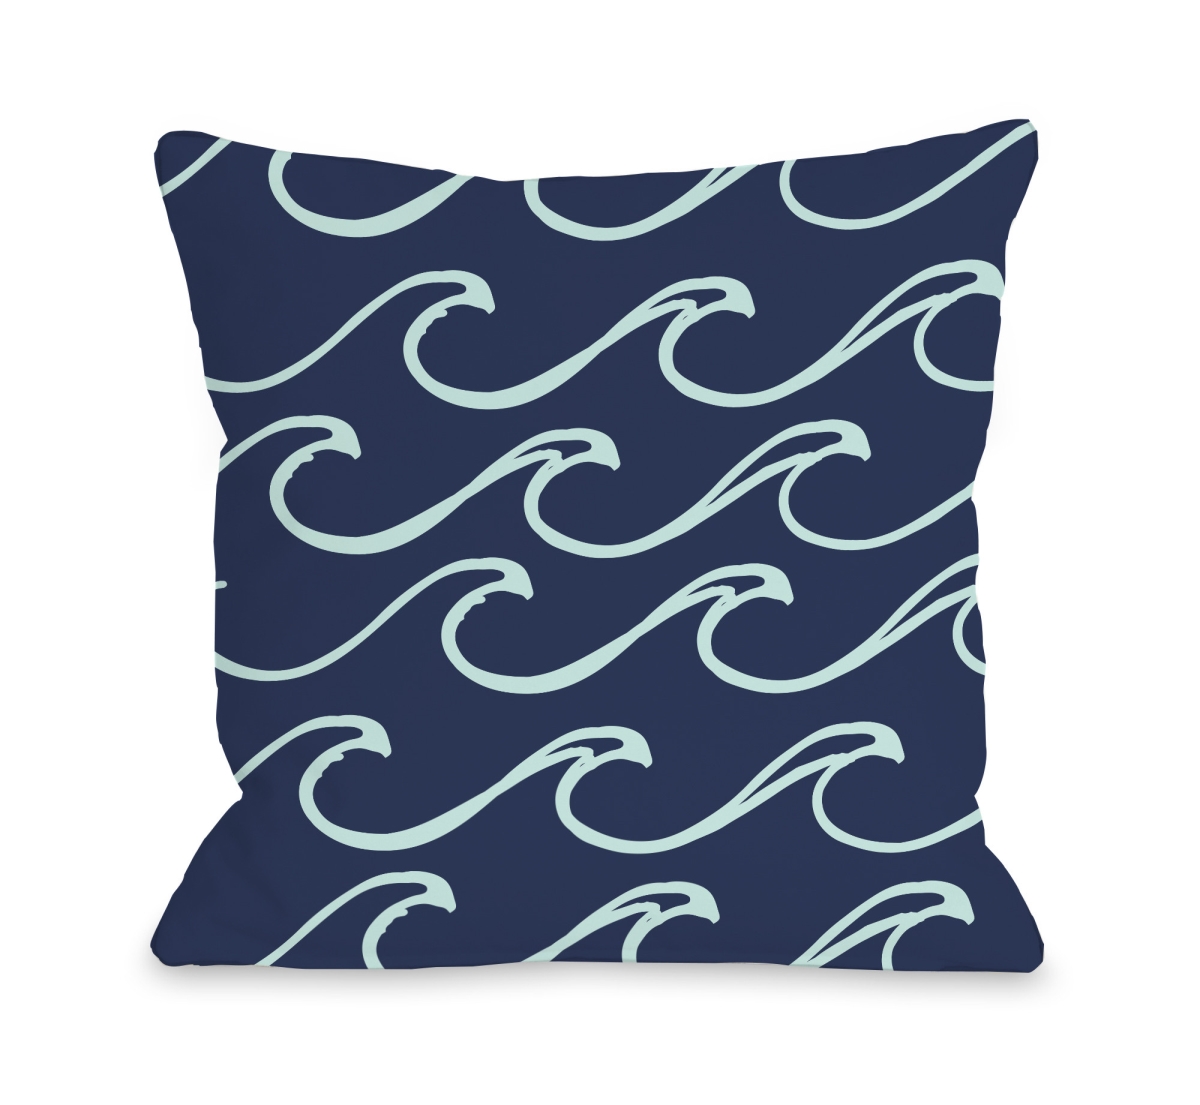 72264pl16o 16 X 16 In. Kayla Wave Outdoor Pillow, Dark Blue